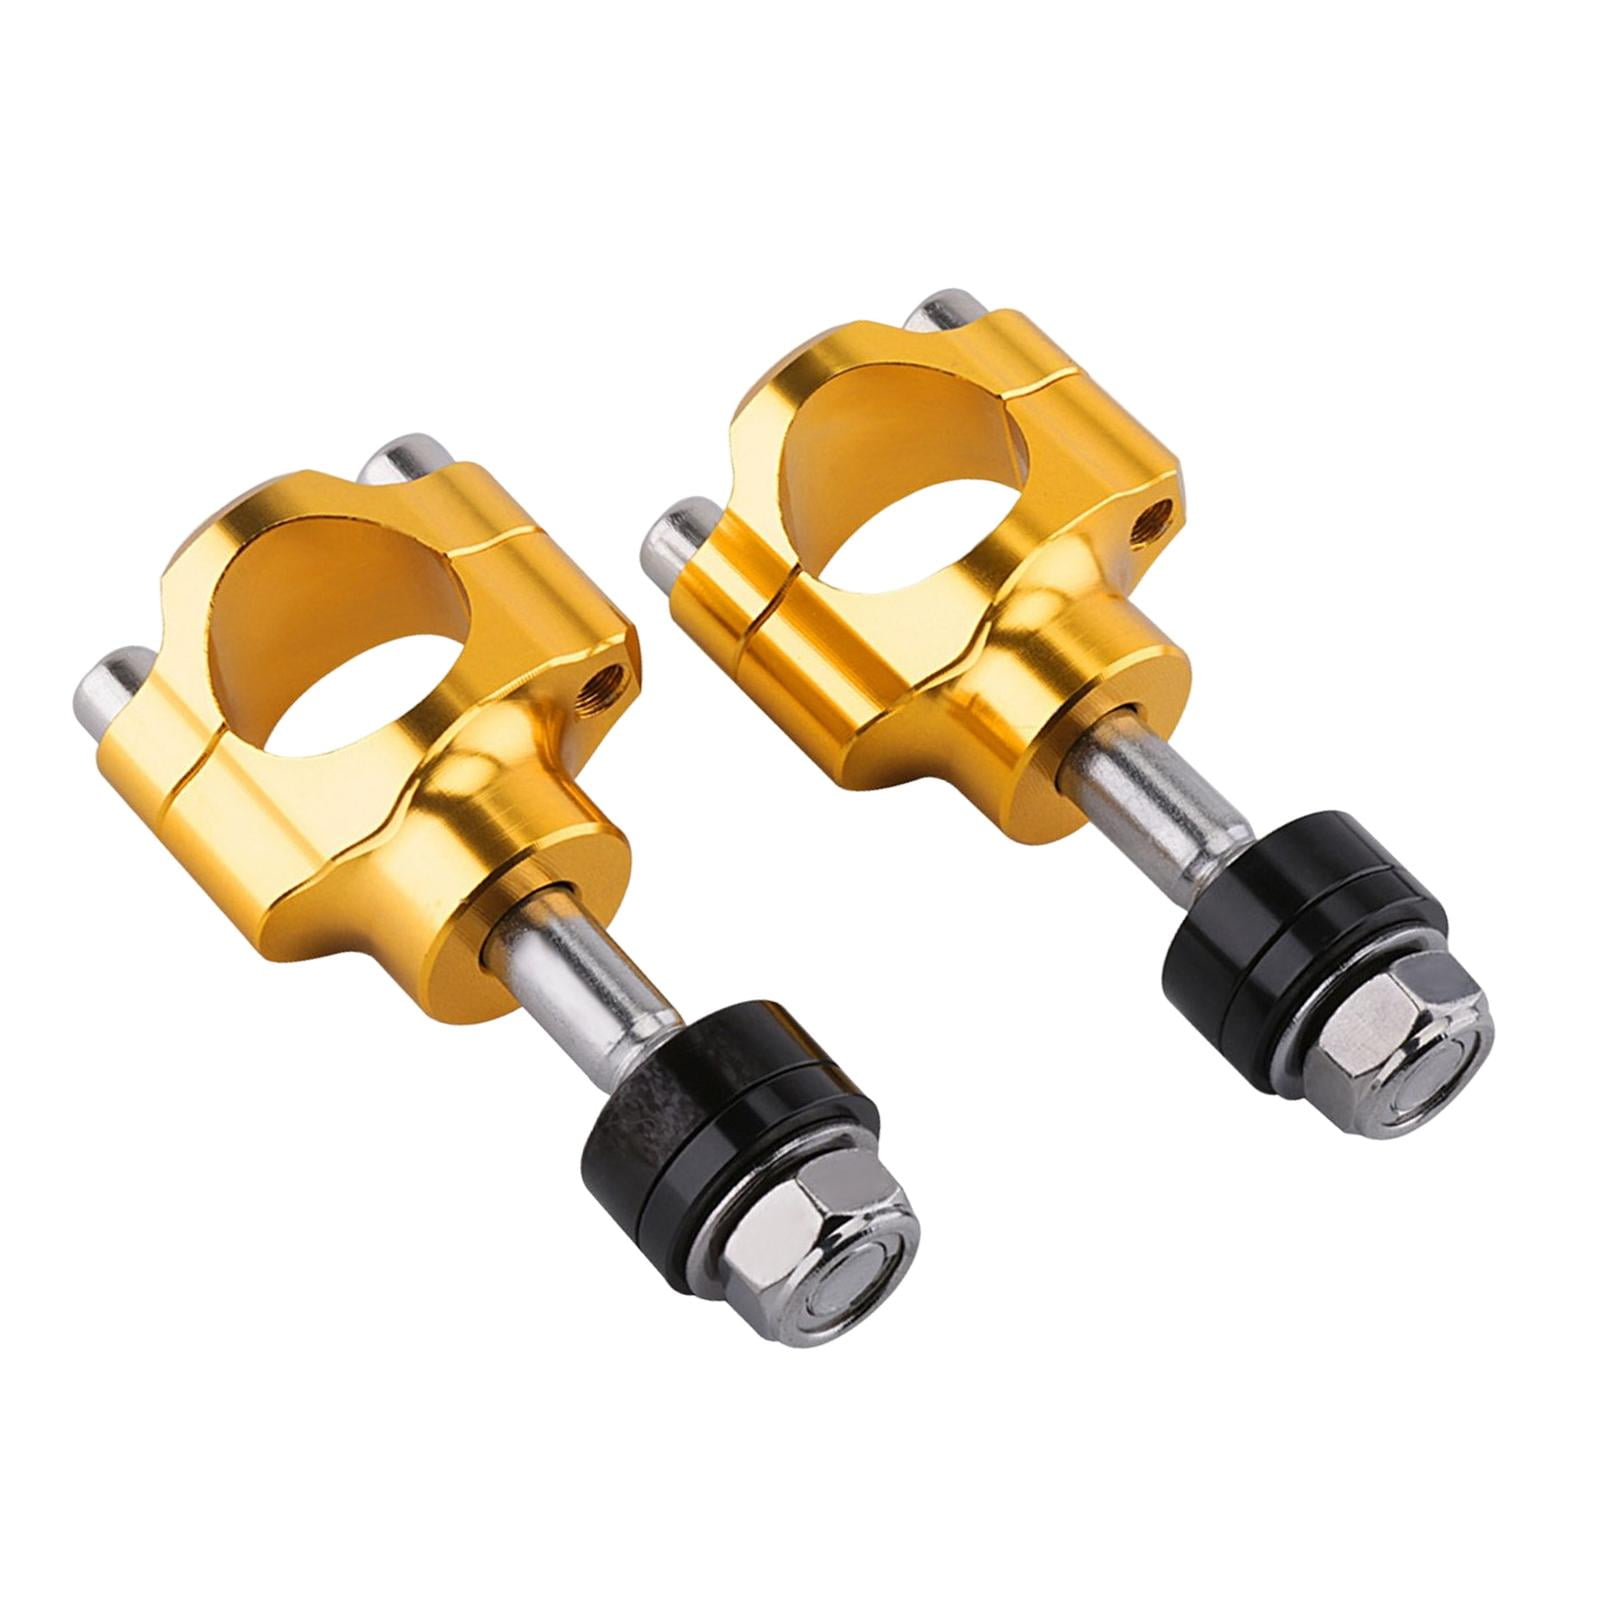 GO KART CABLE CLAMP HIGH QUALITY GOLD or BLACK THE BEST NOT THE CHEAPEST !! 